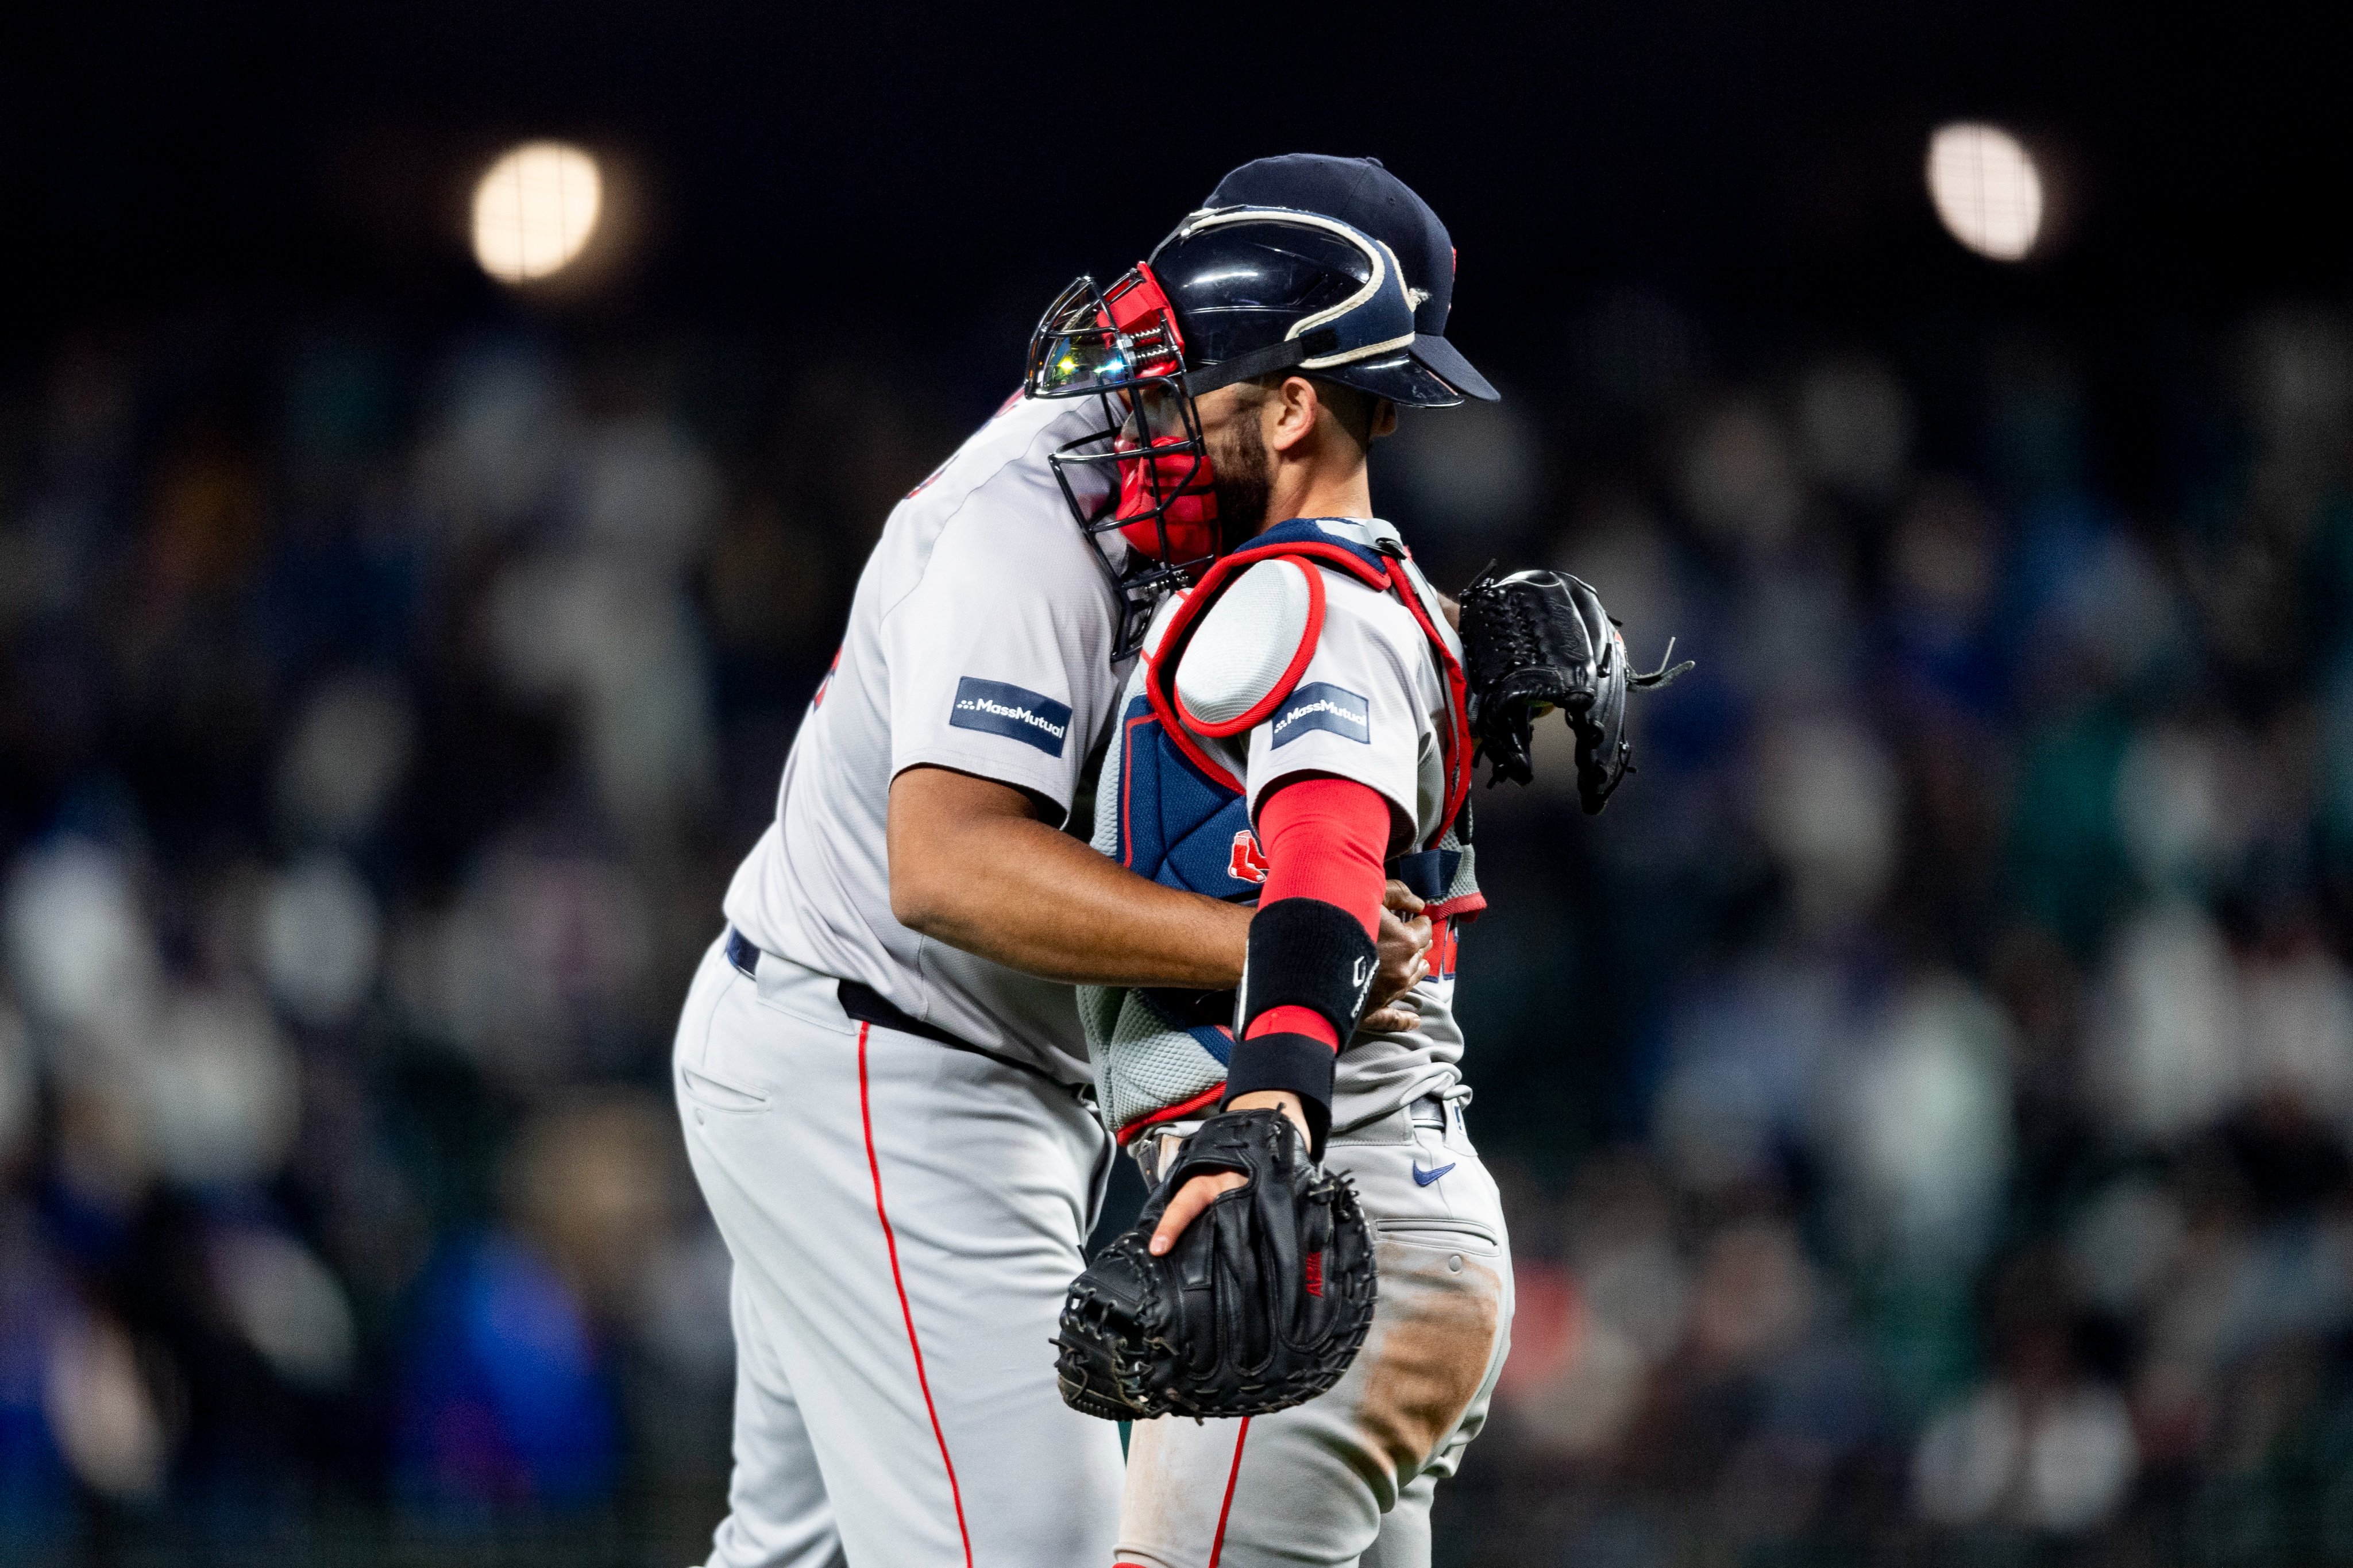 Kenley Jansen and Connor Wong hug after the Red Sox Opening Day win against the Mariners.